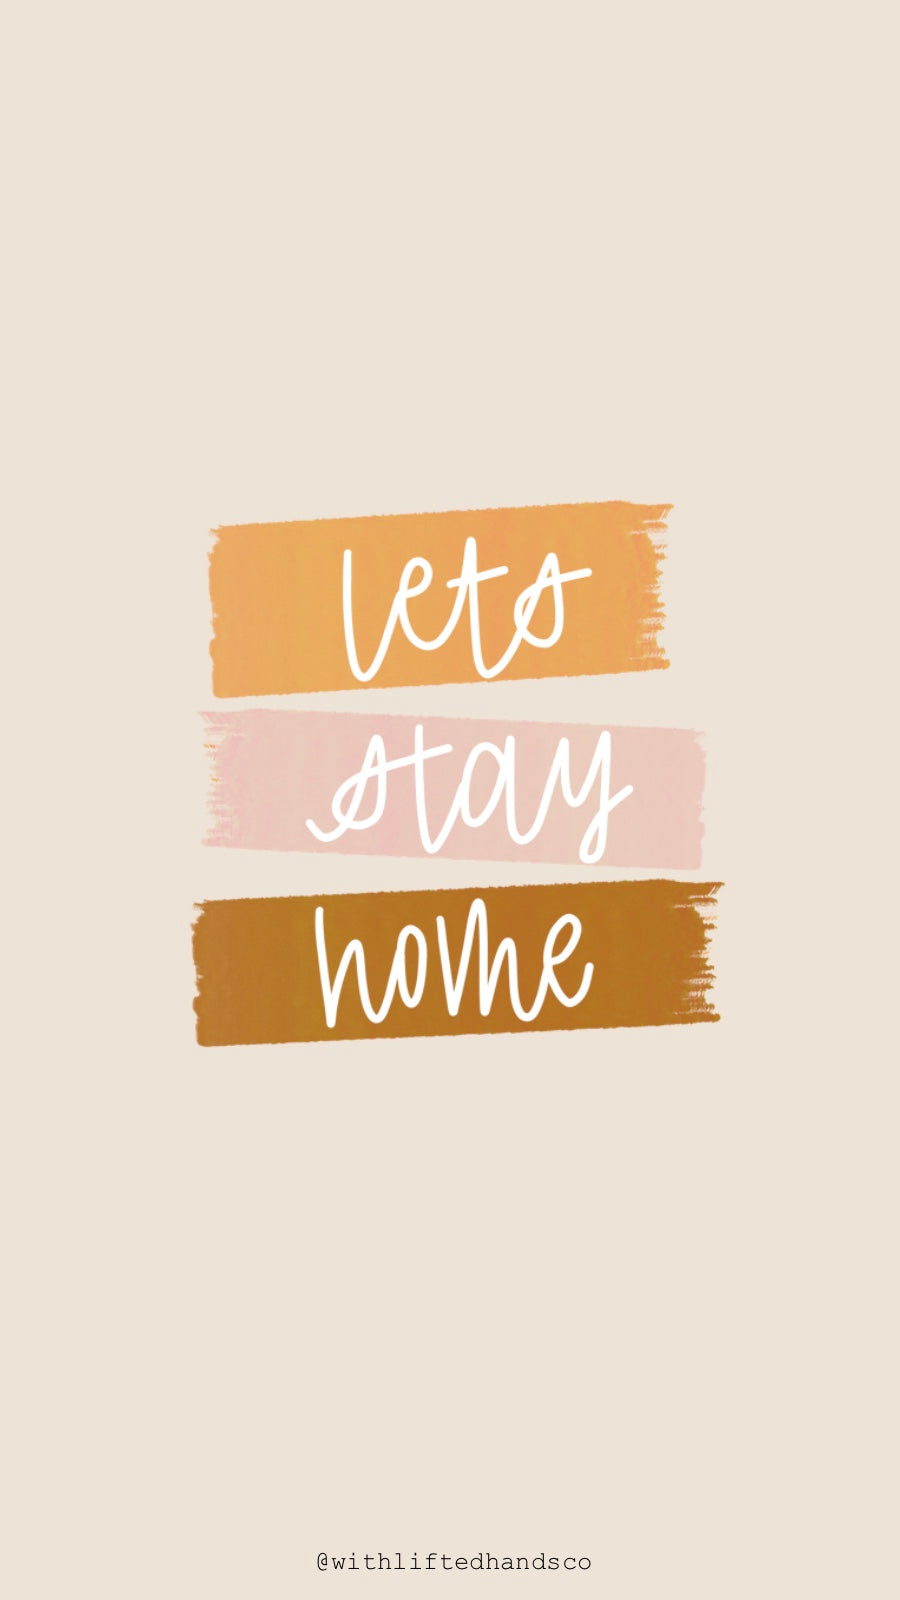 Let’s stay home phone wallpapers by with lifted hands co